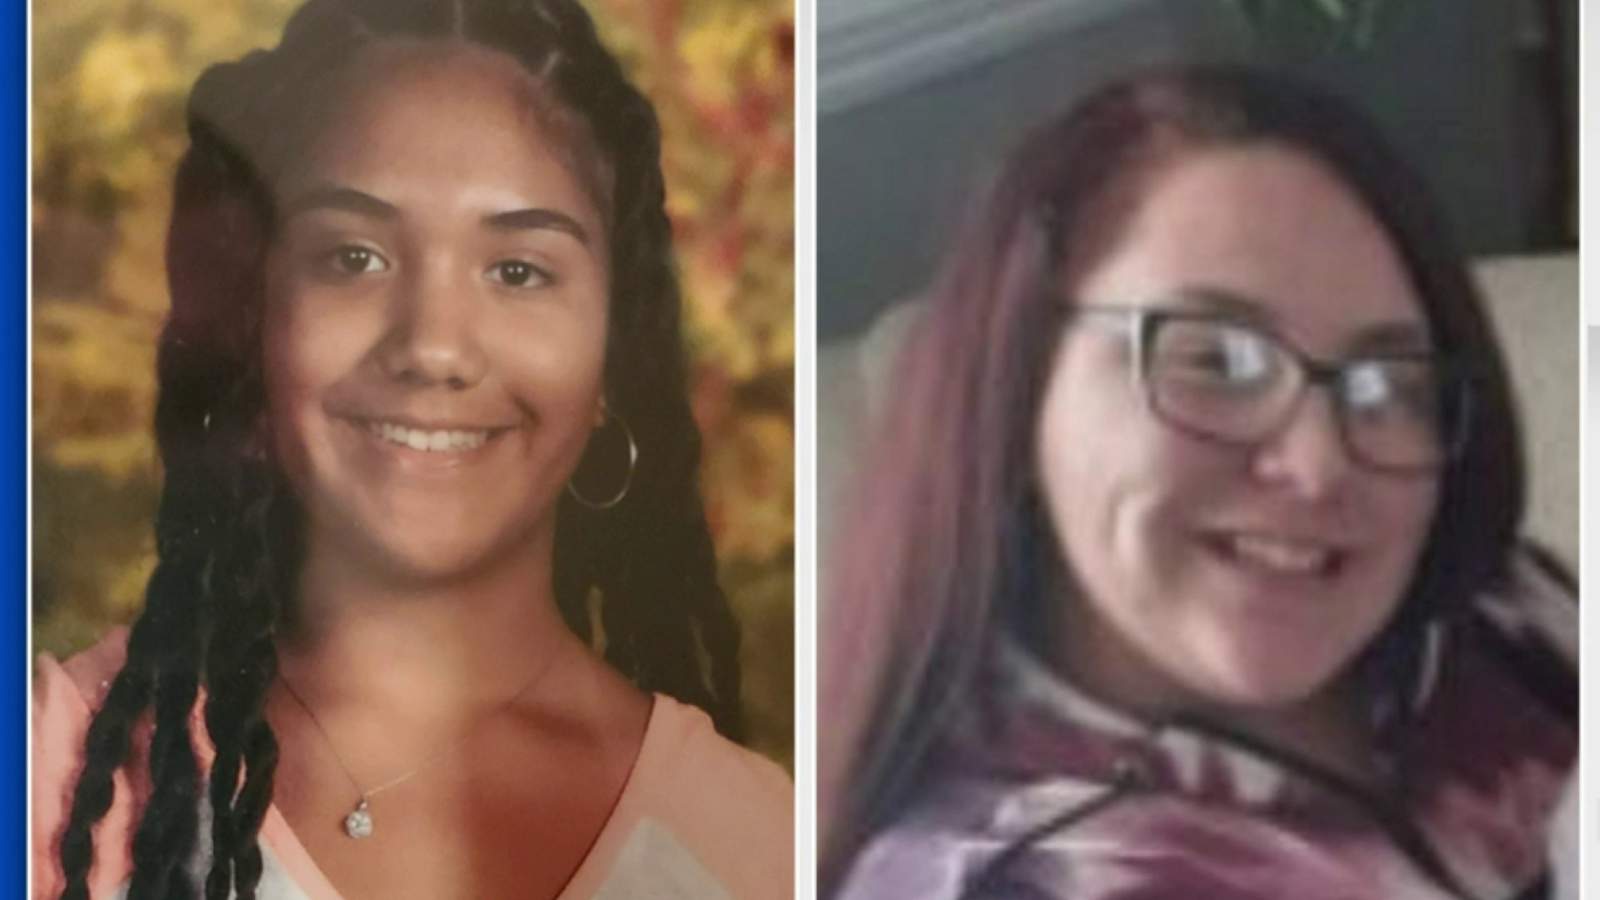 Metro Detroit families of 2 missing teens unite to ask public for help in finding them